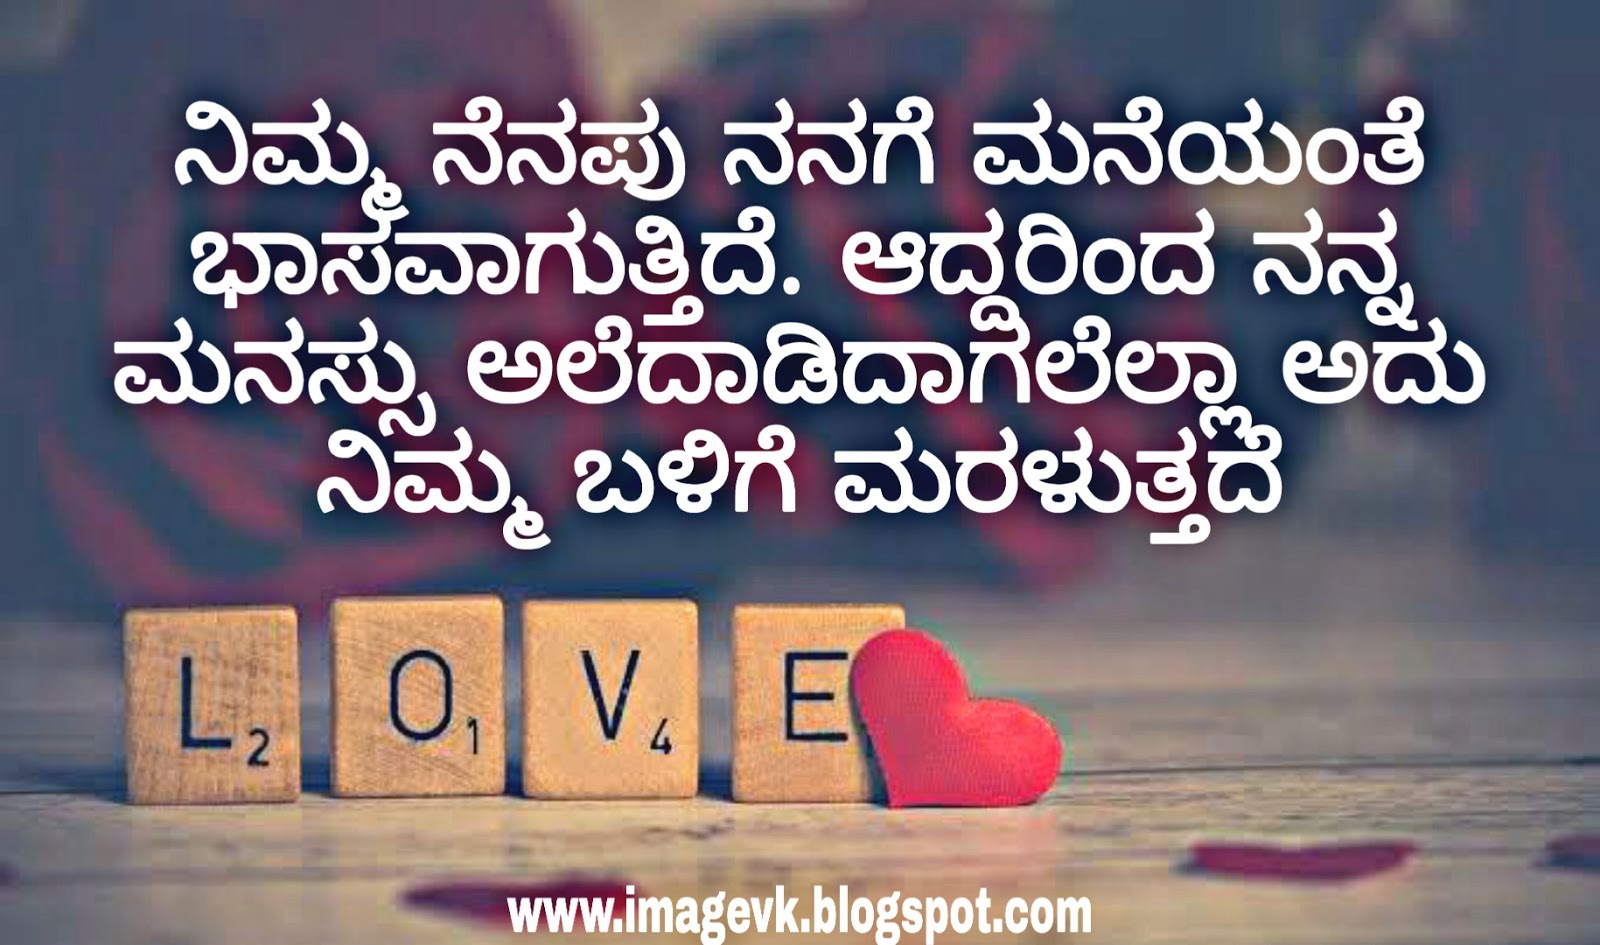 Best 50 love quotes in kannada - Love failure quotes in kannada